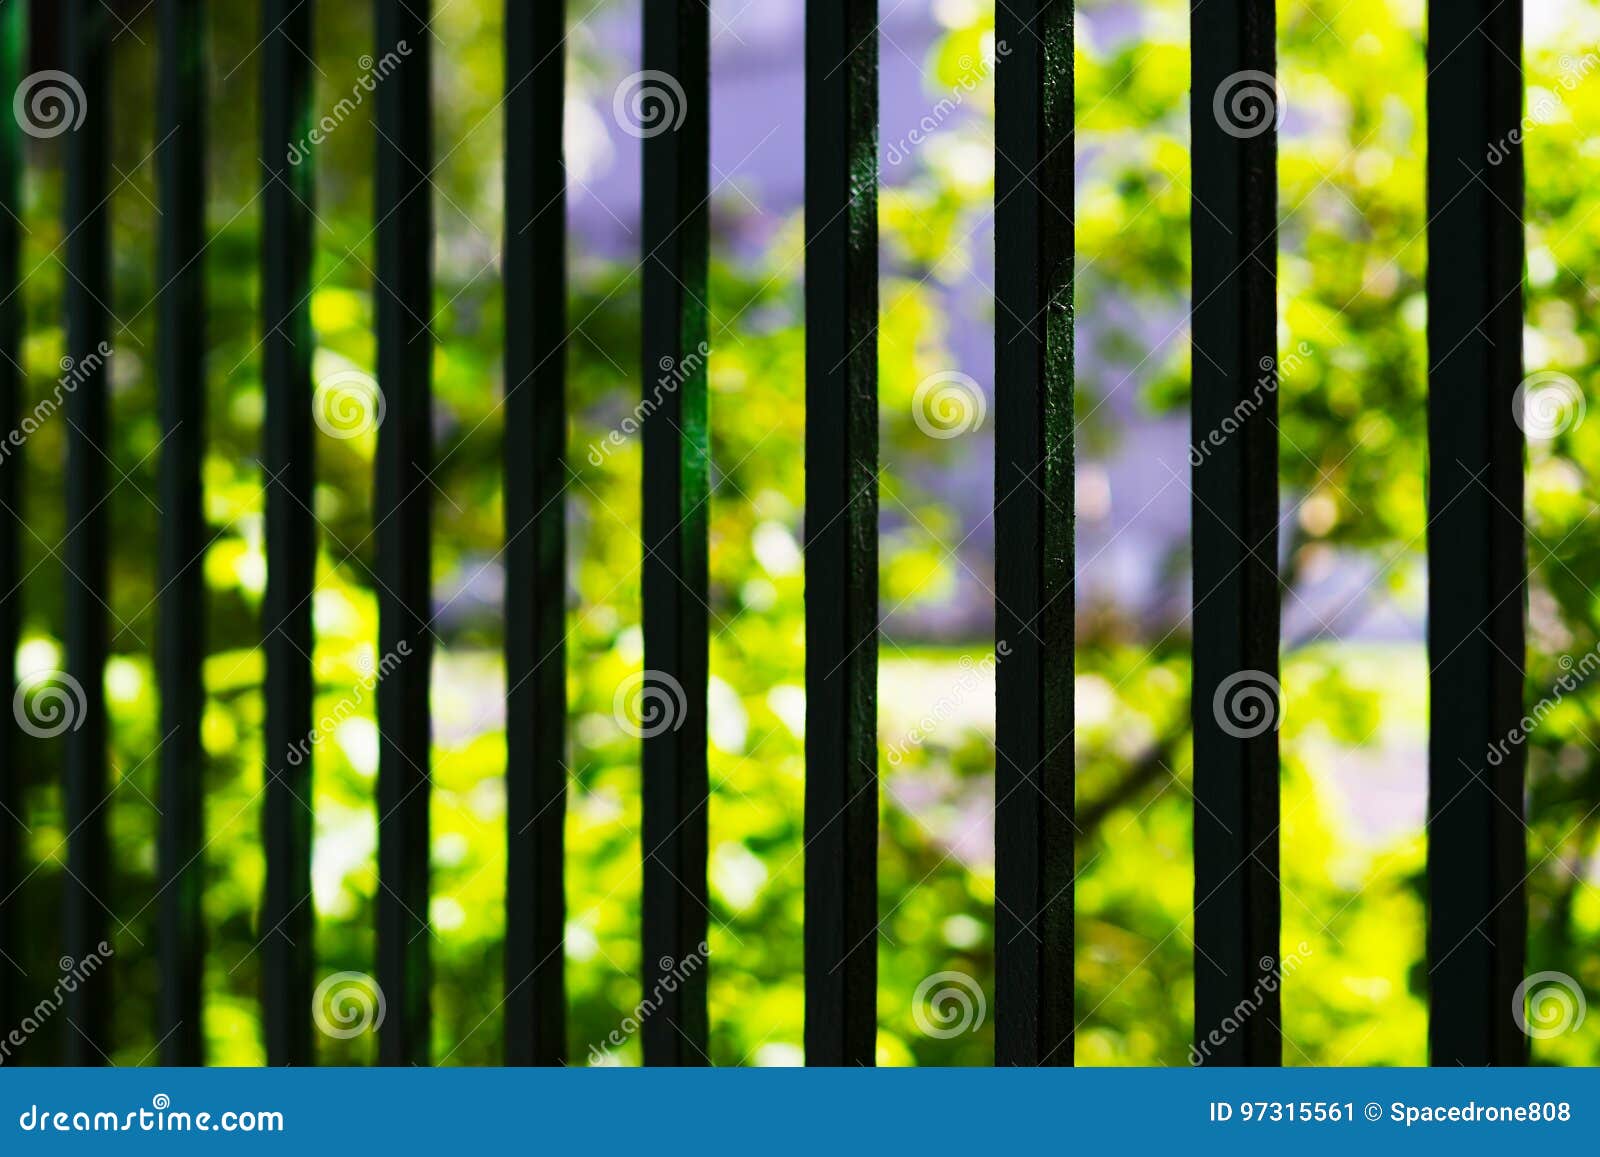 Vertical Jail Cell Bokeh Background Stock Image - Image of postcard,  amnesty: 97315561